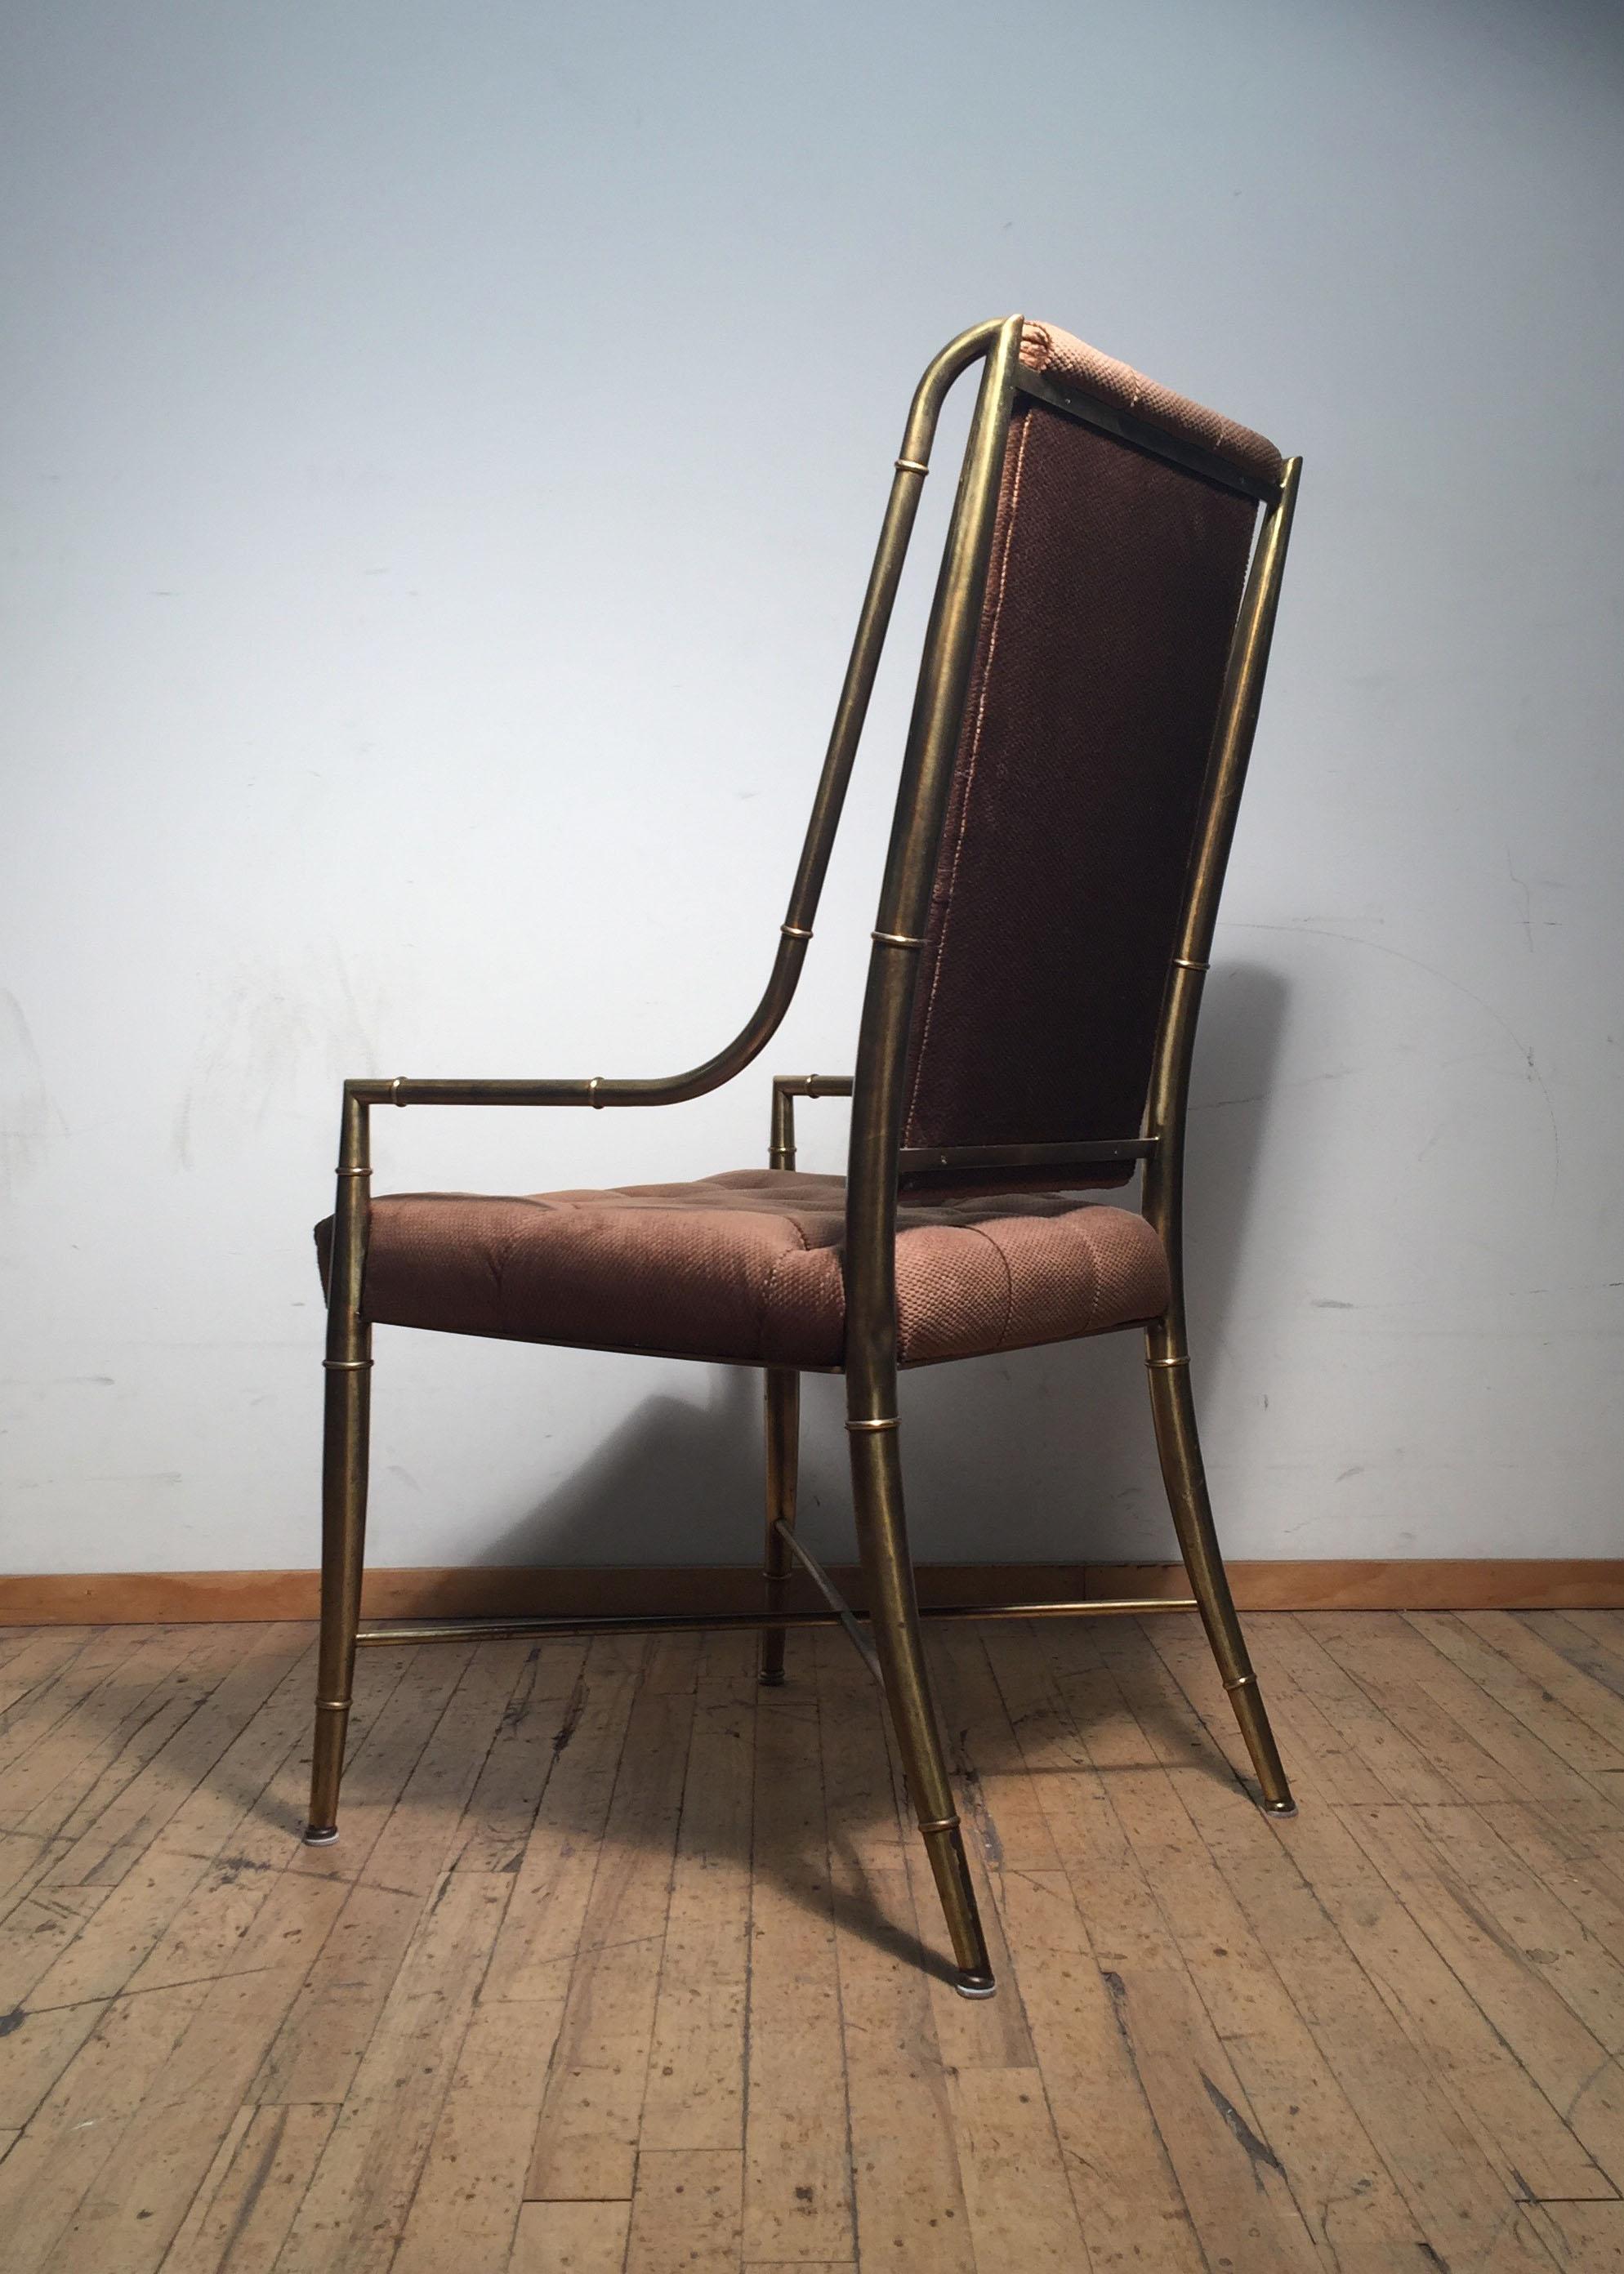 Italian Six Mastercraft Brass Bamboo Imperial Dining Chairs, Italy - 12 available For Sale